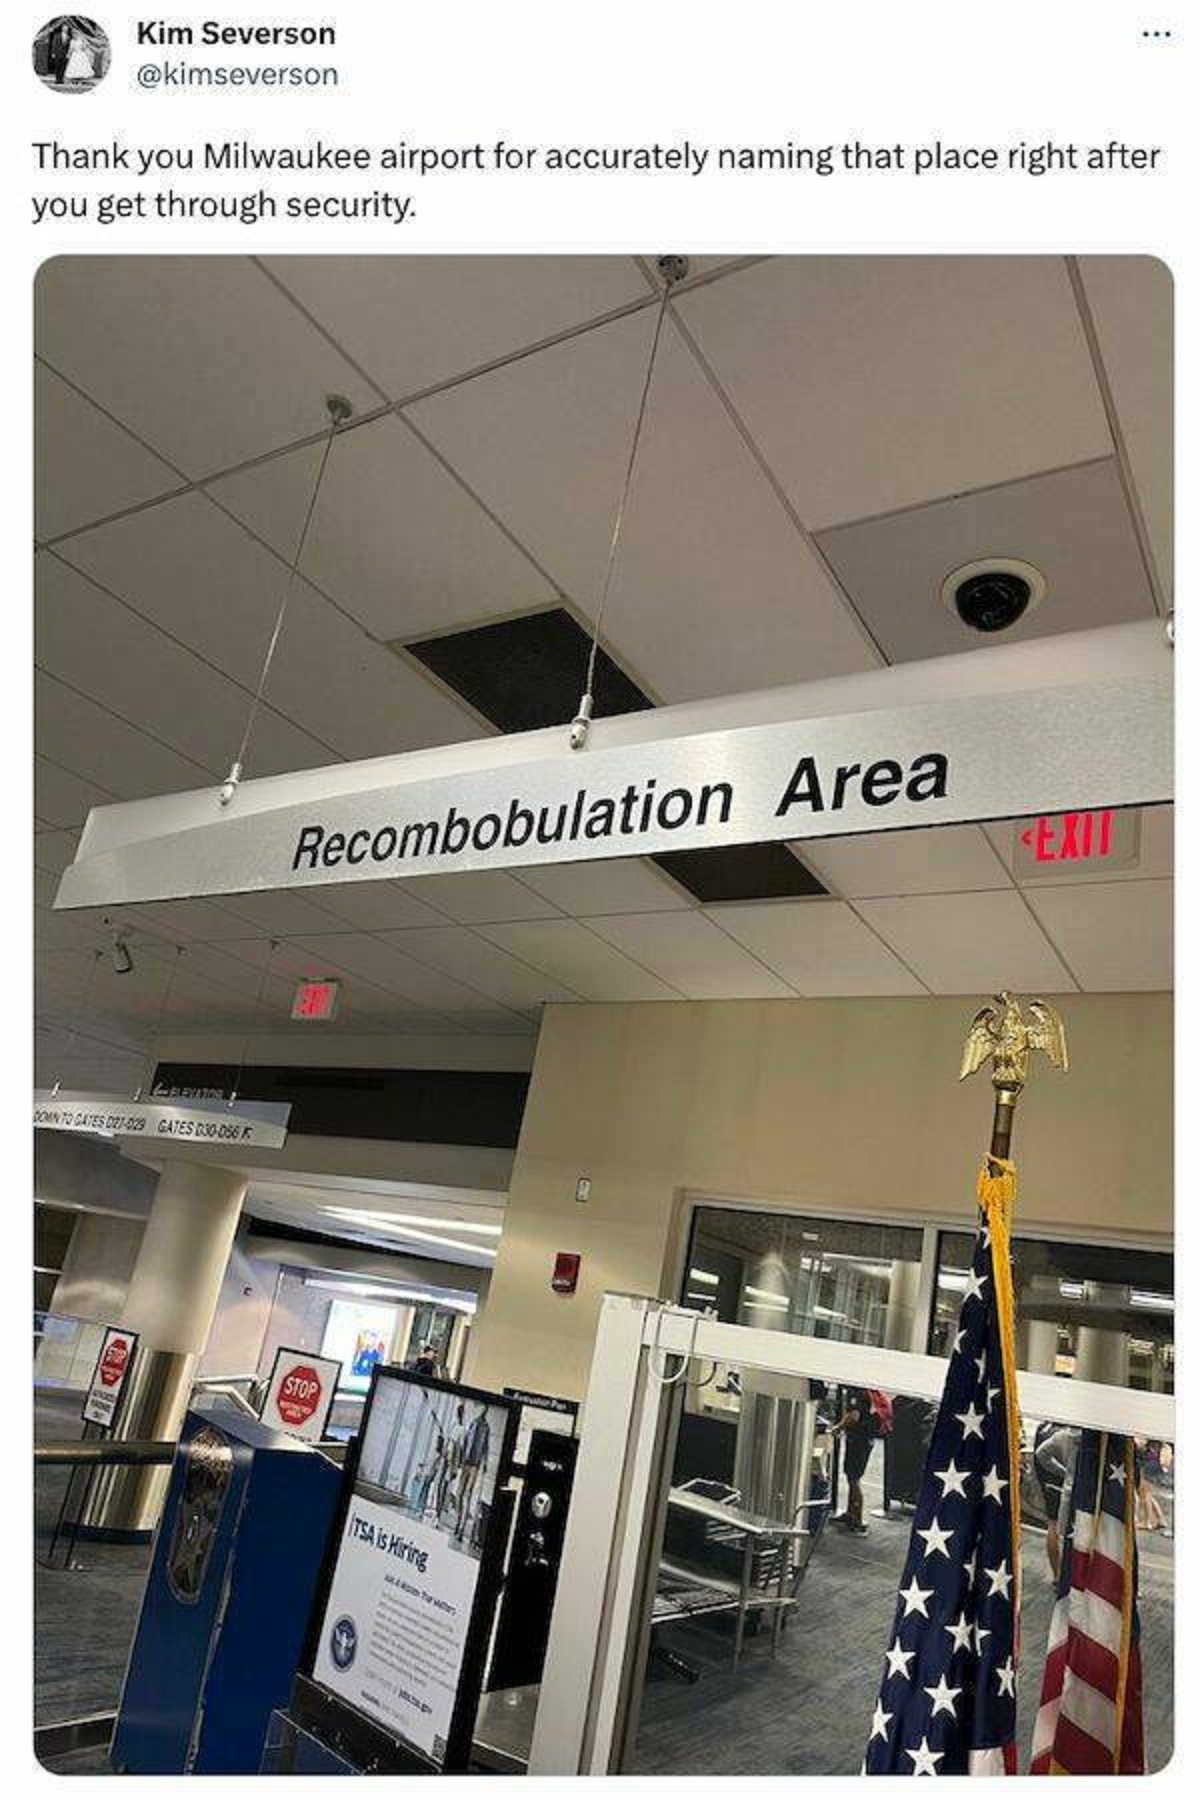 funny tweets - ceiling - Kim Severson Oldin Thank you Milwaukee airport for accurately naming that place right after you get through security. Recombobulation Area Liet Sta A